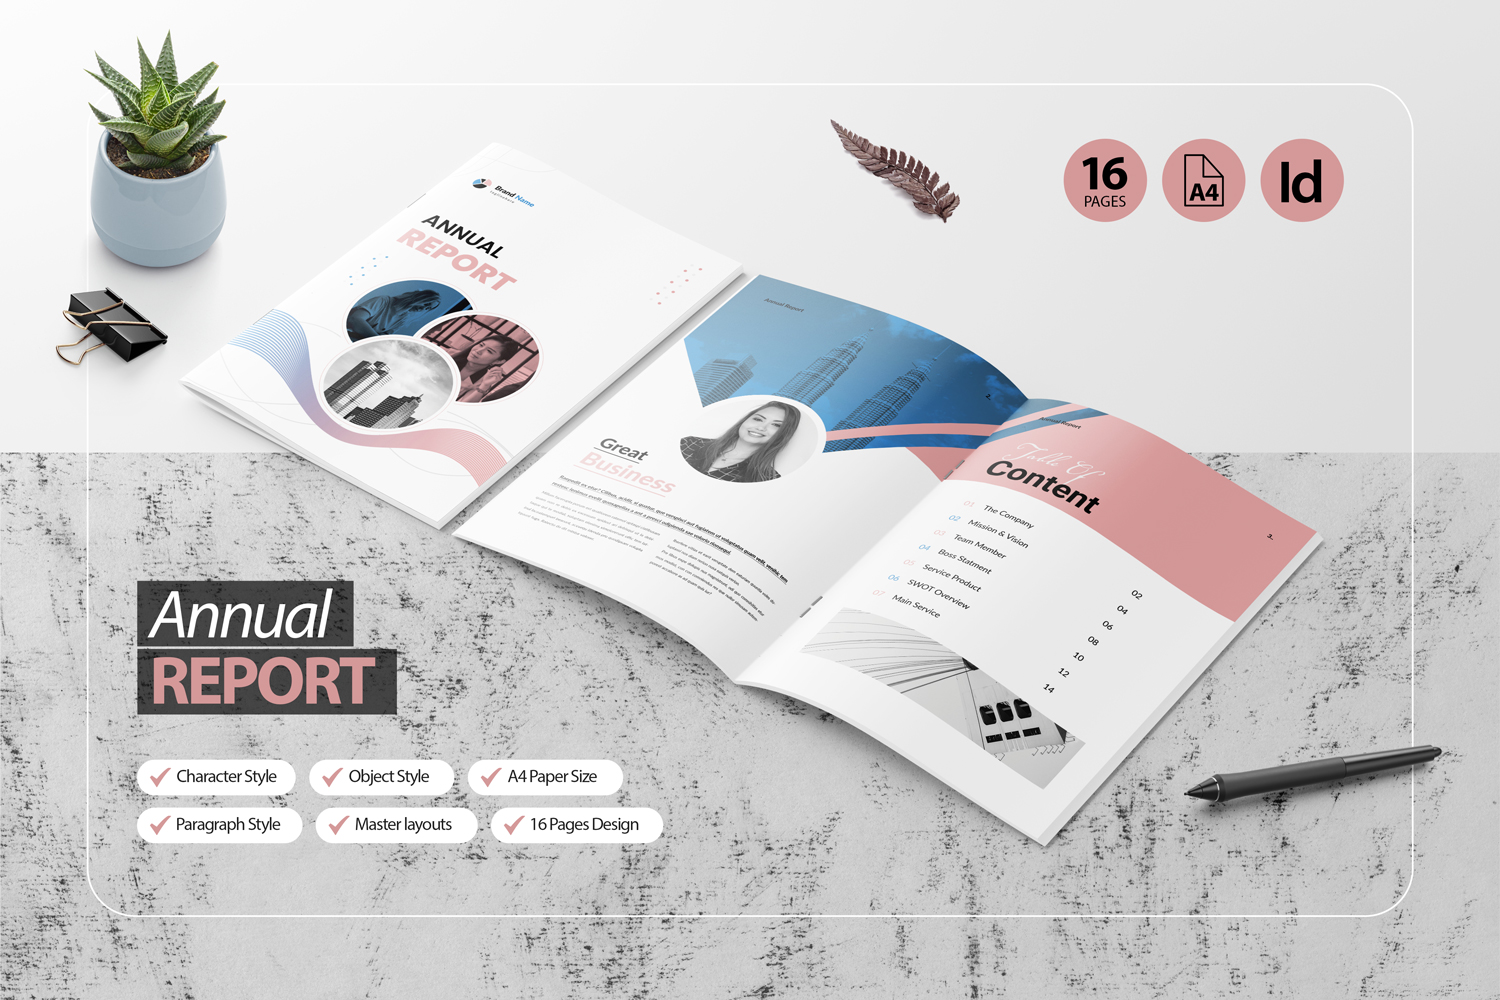 Annual Report Template - 16 pages Brochure